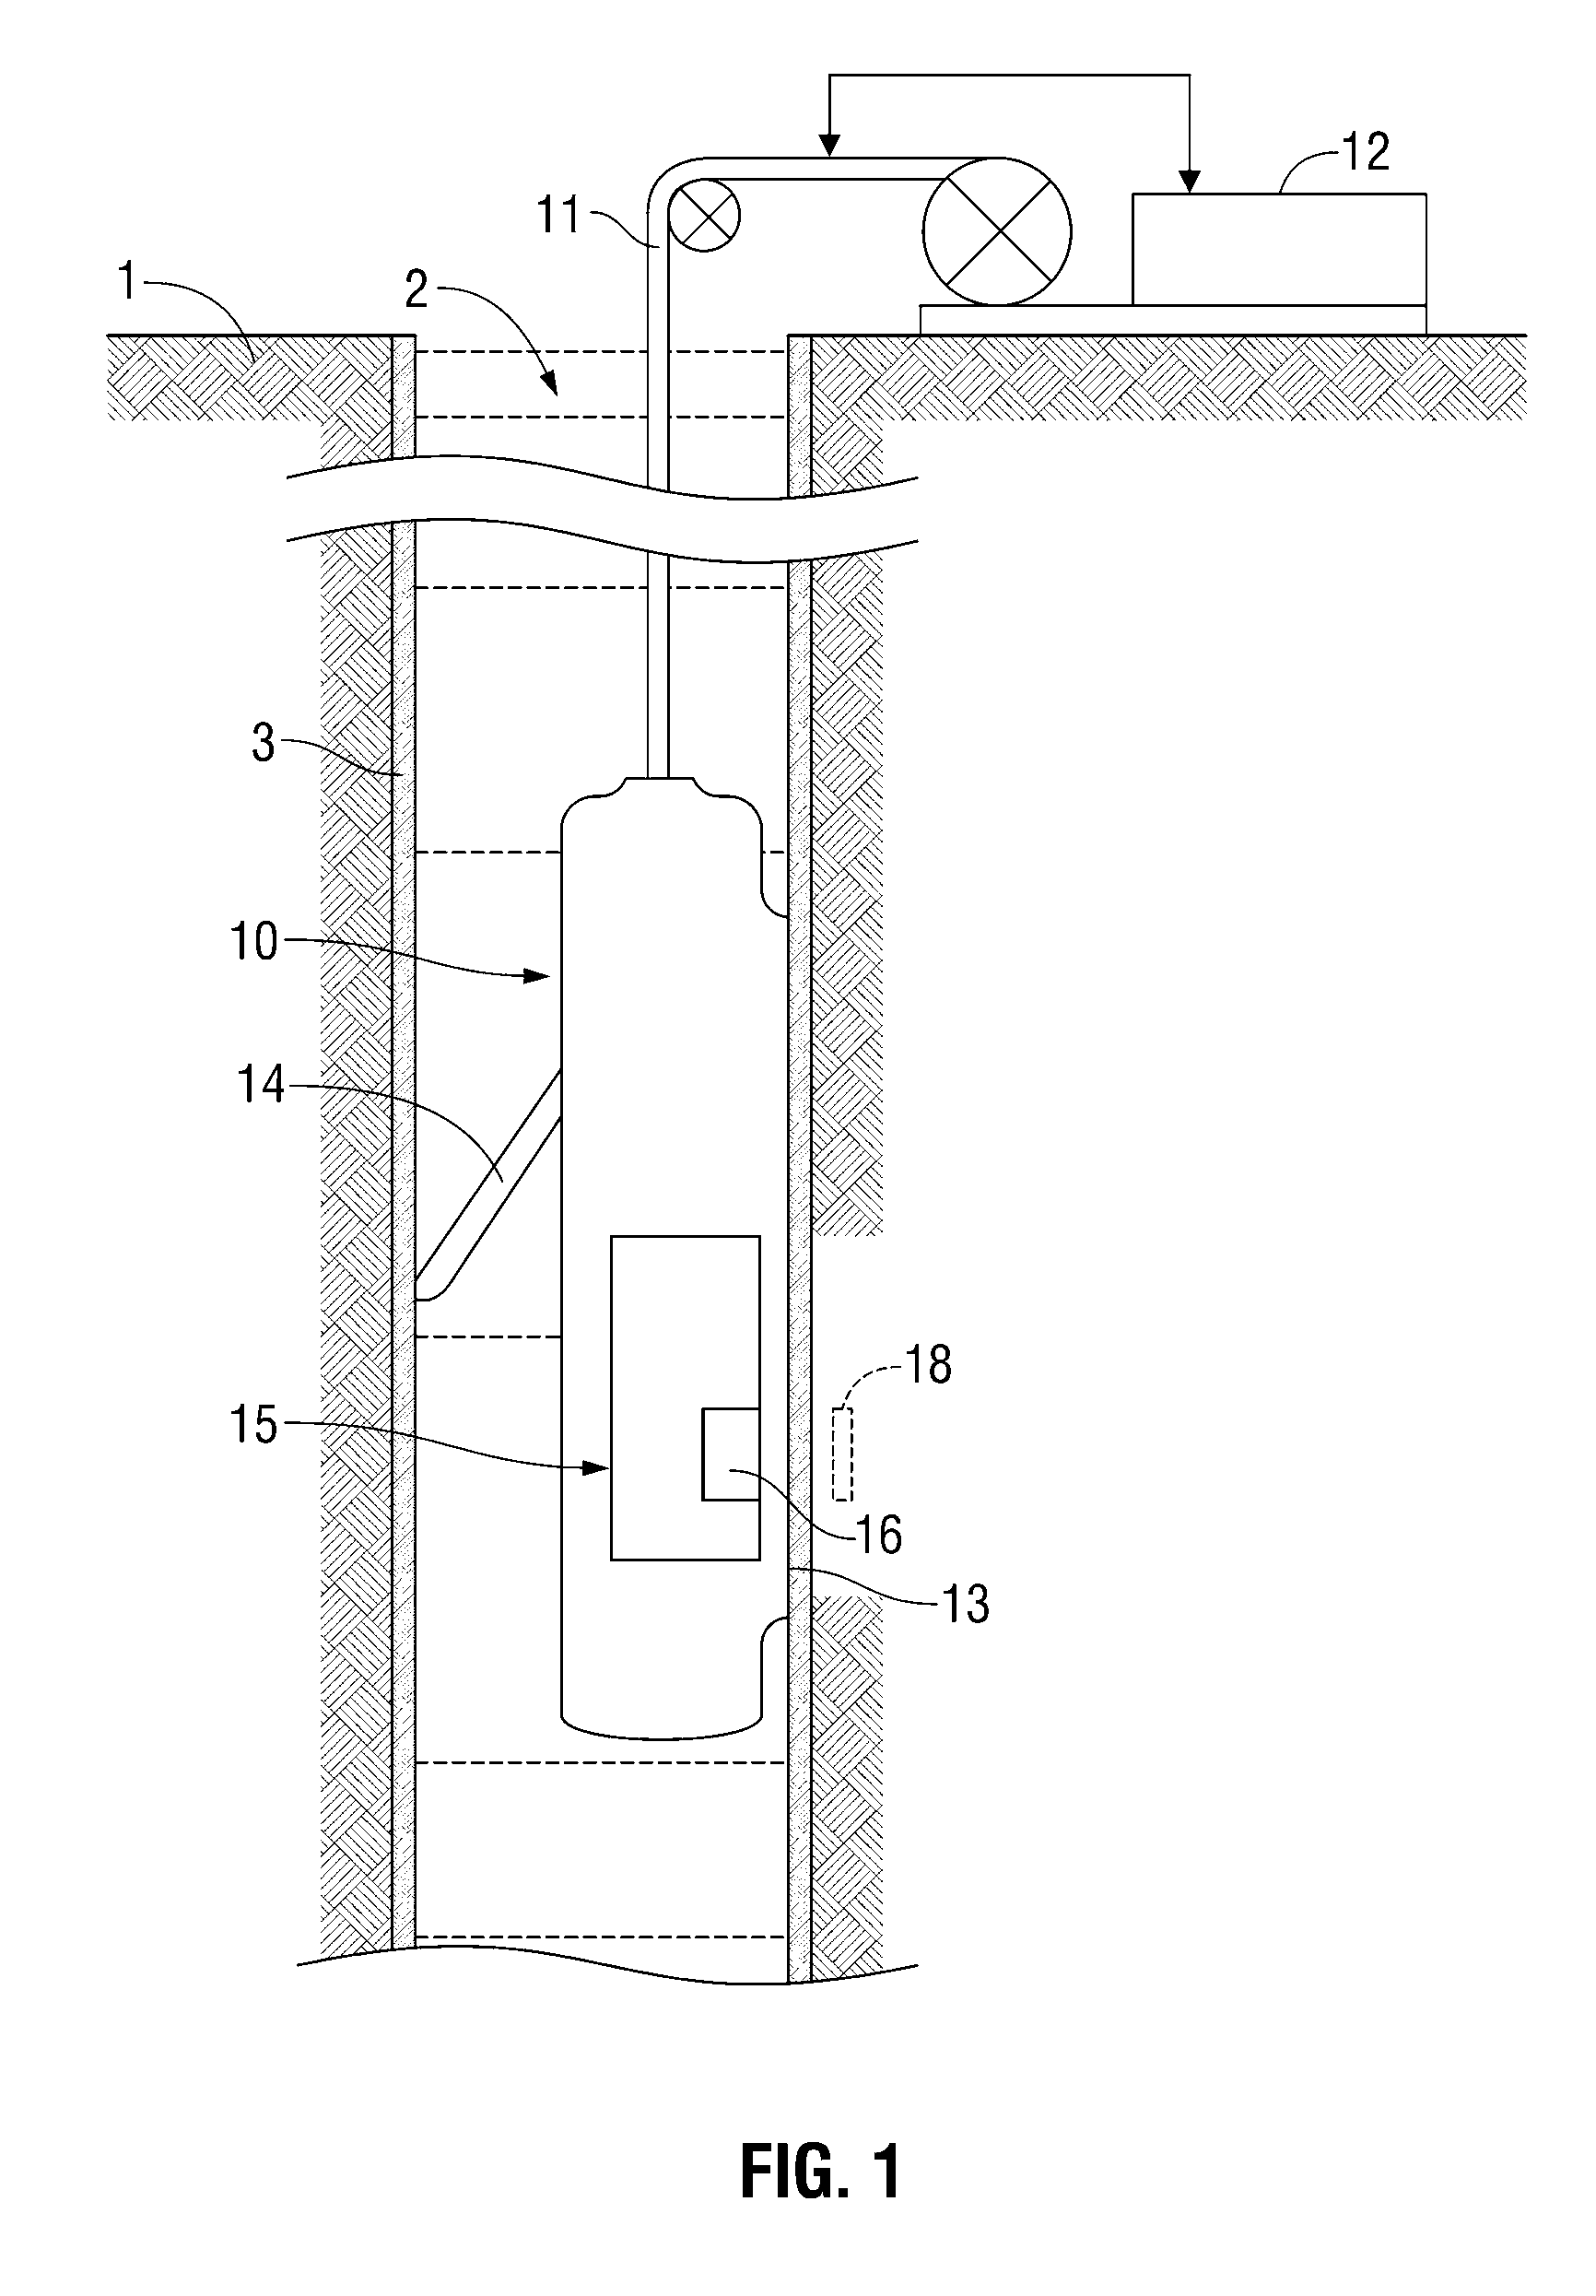 System and method for emulating nuclear magnetic resonance well logging tool diffusion editing measurements on a bench-top nuclear magnetic resonance spectrometer for laboratory-scale rock core analysis